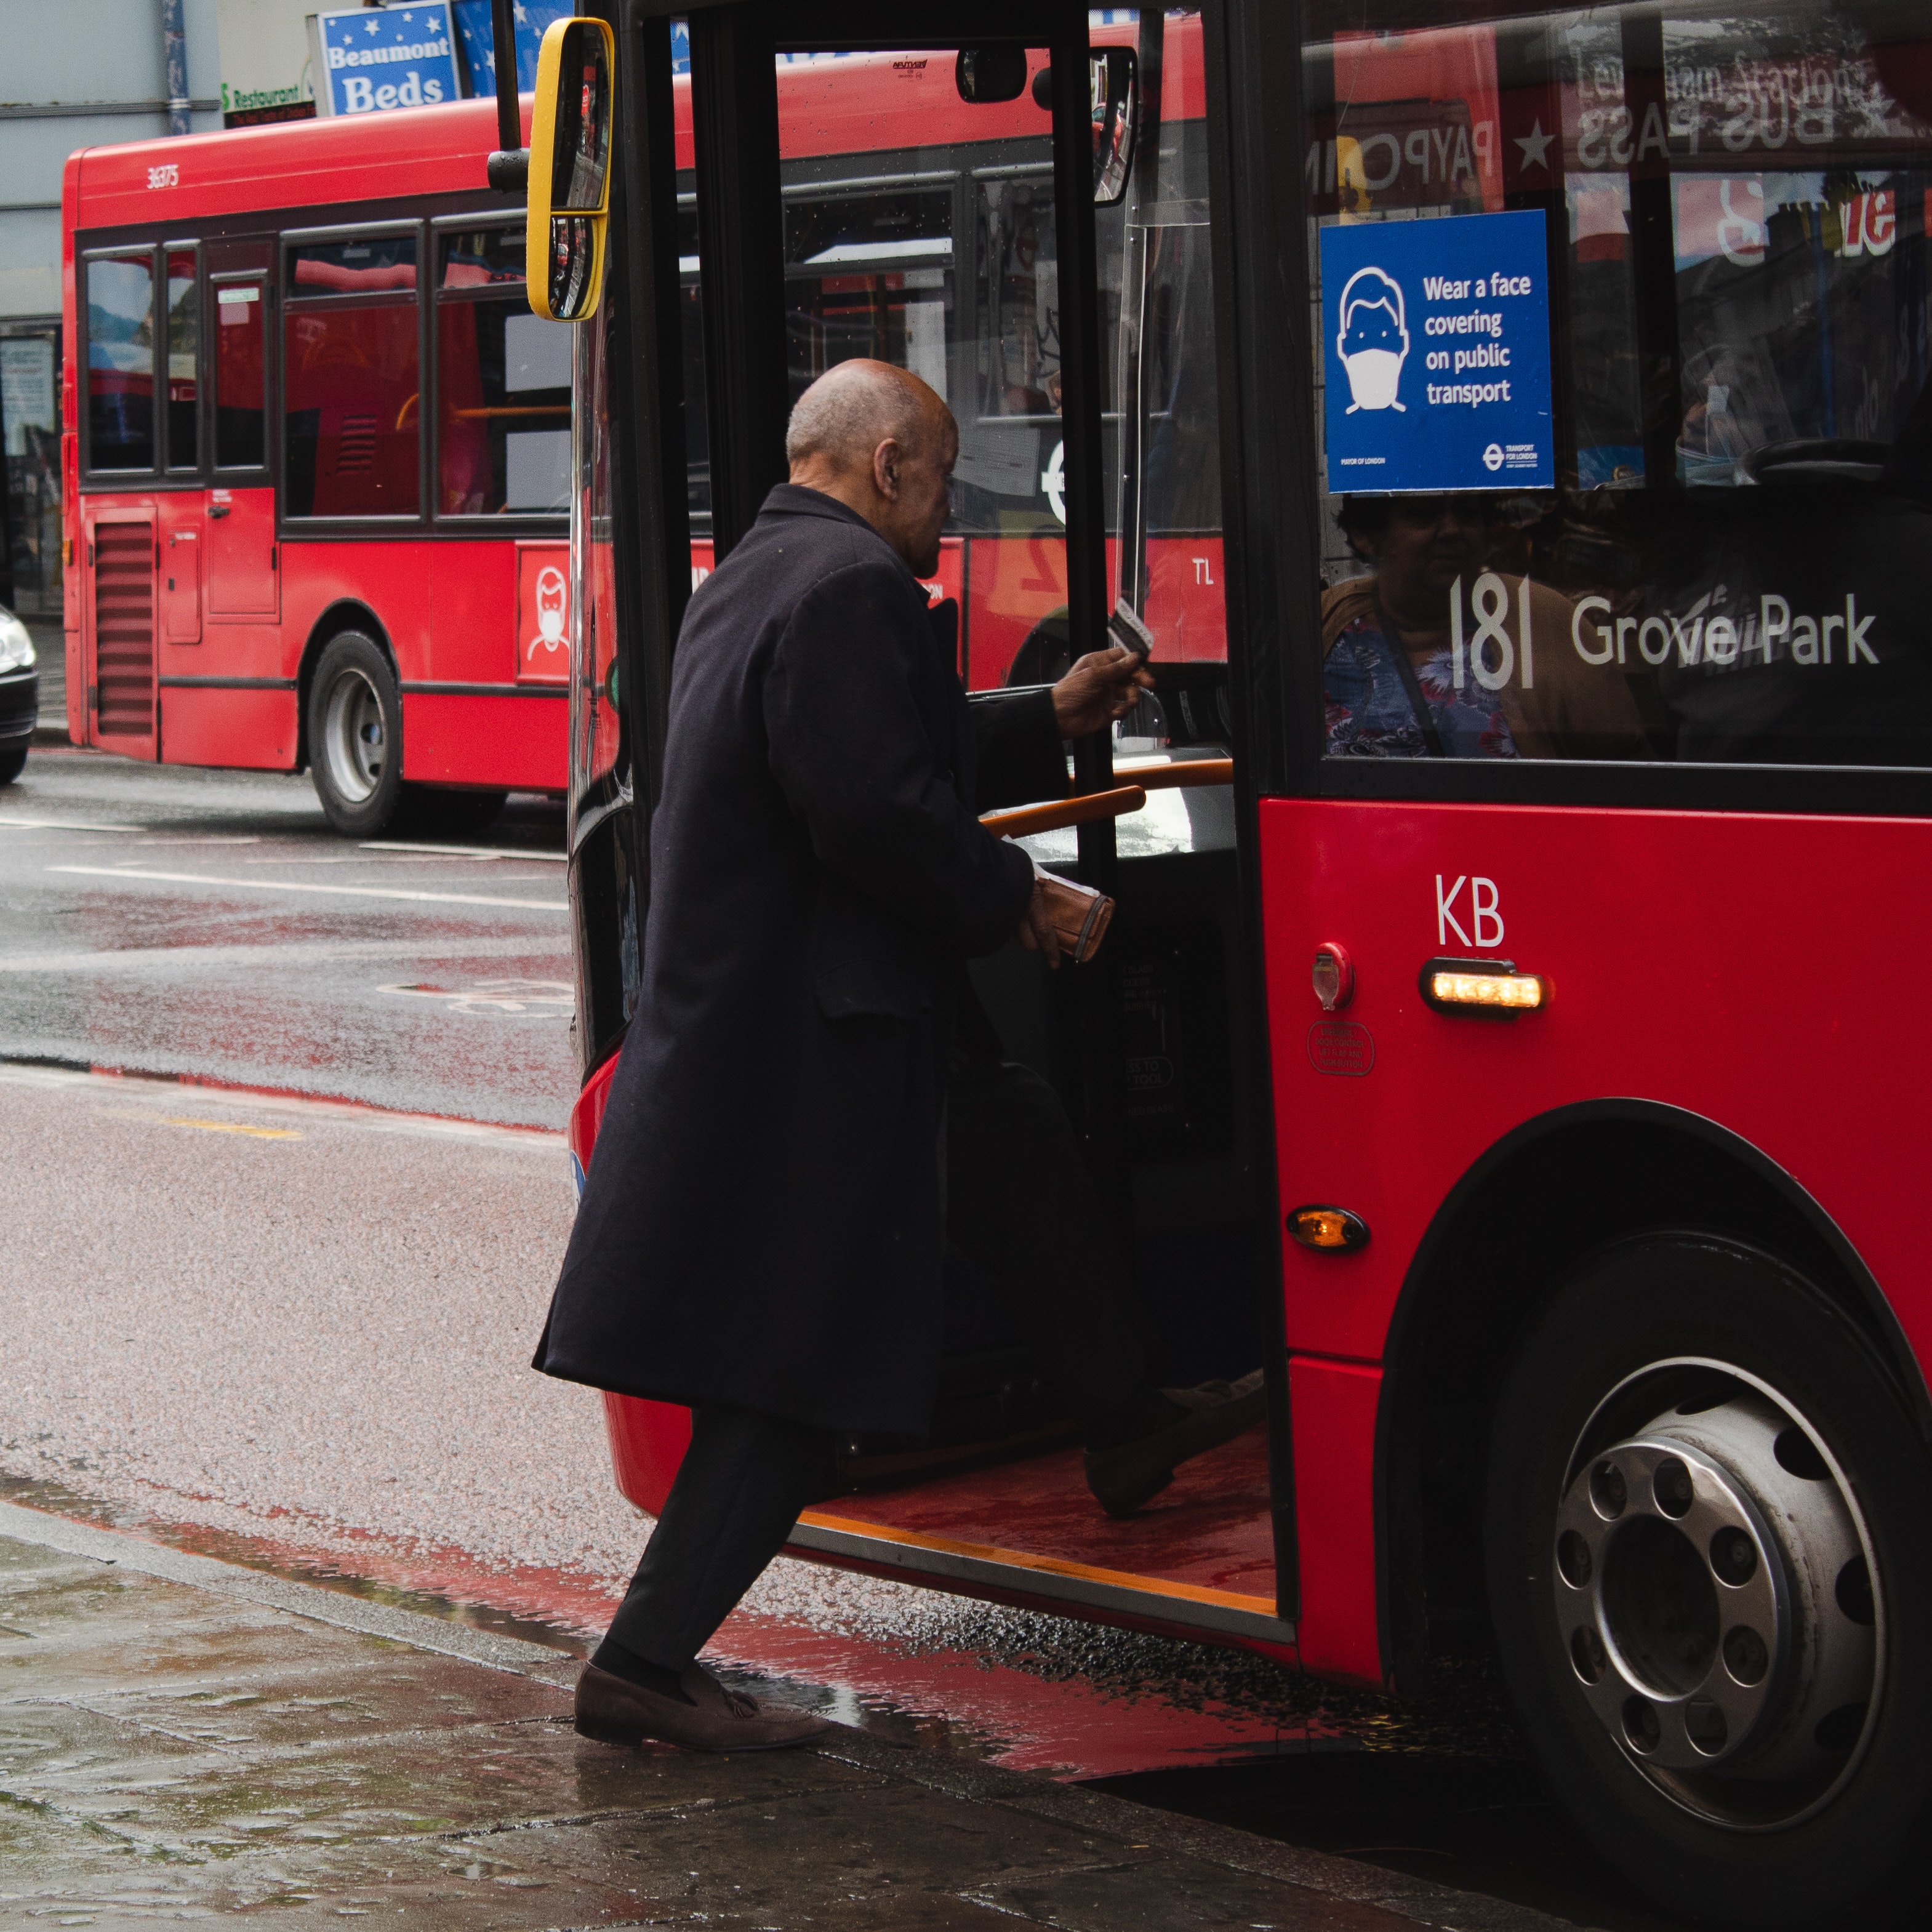 Man boarding red bus; image by Rossano D'Angelo, via Unsplash.com.